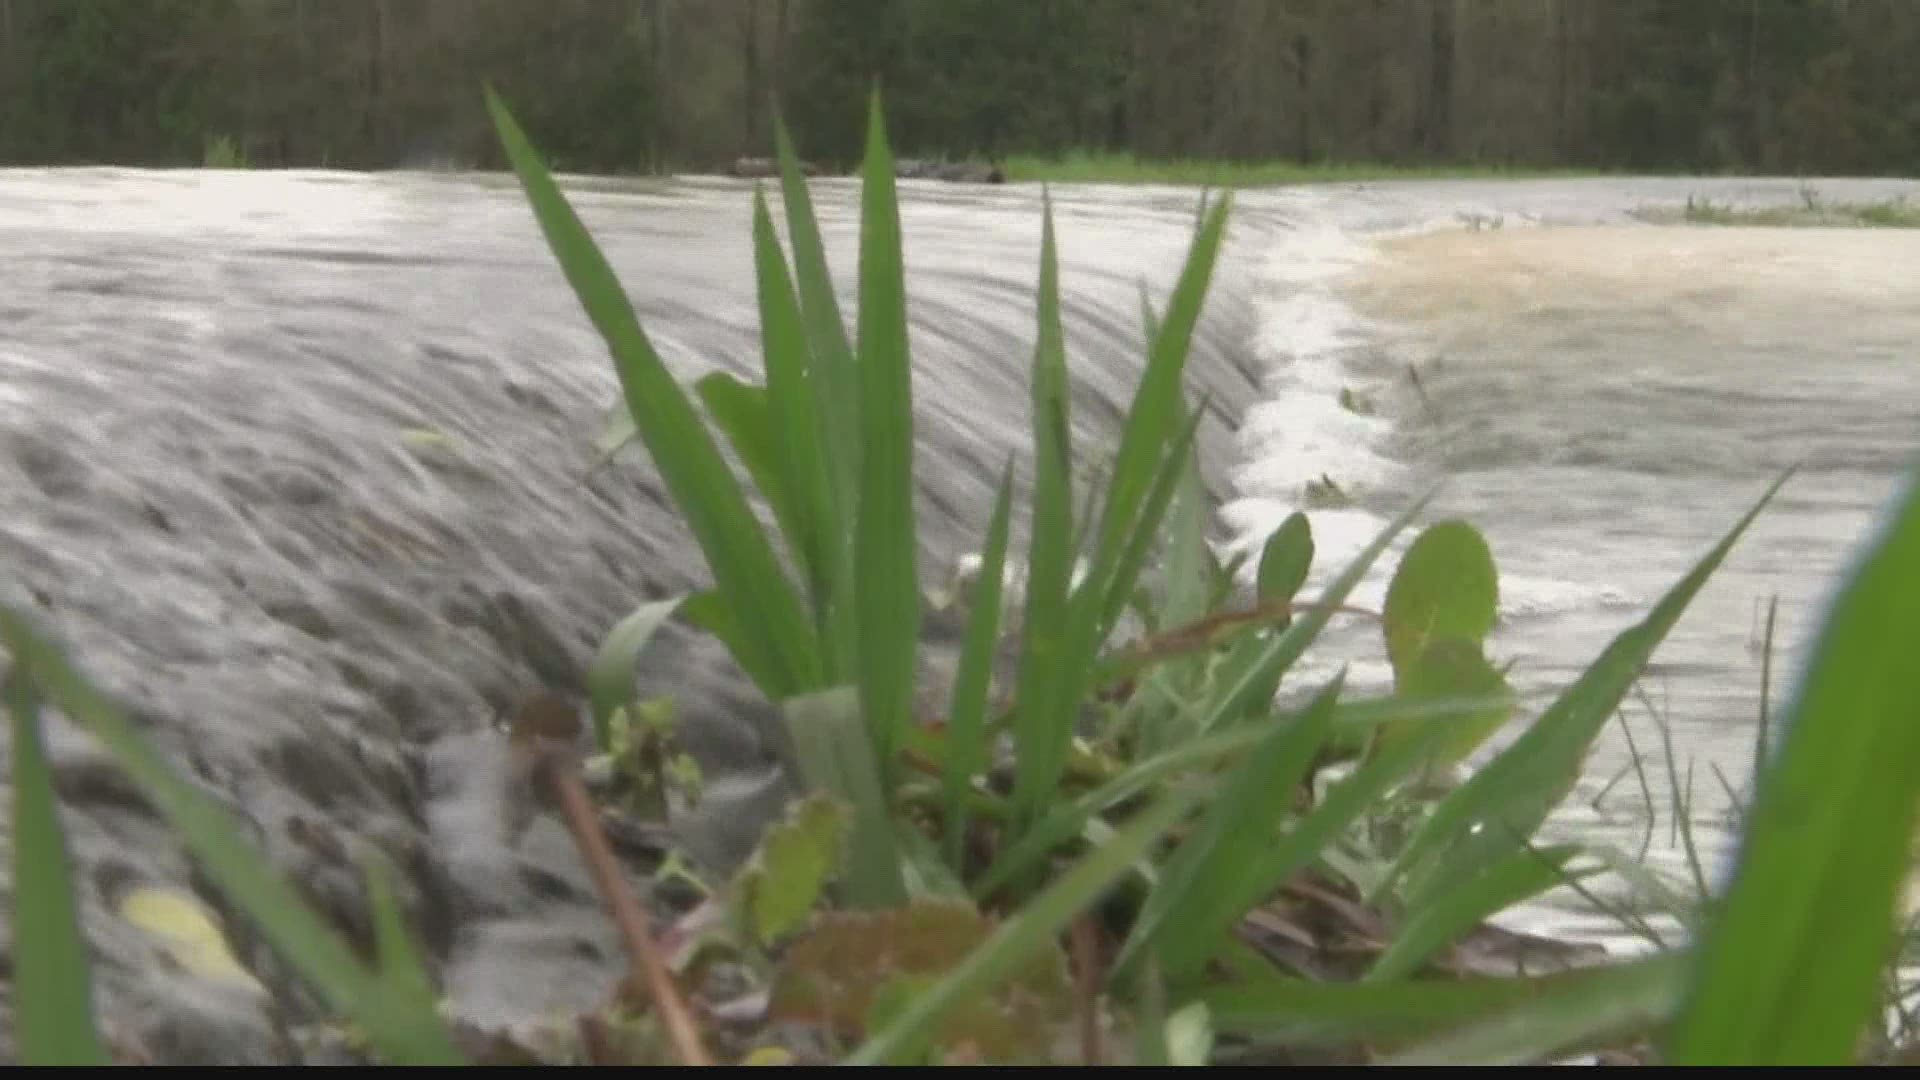 All the rain dumped by these storms this month have caused widespread flooding throughout the Tennessee Valley.